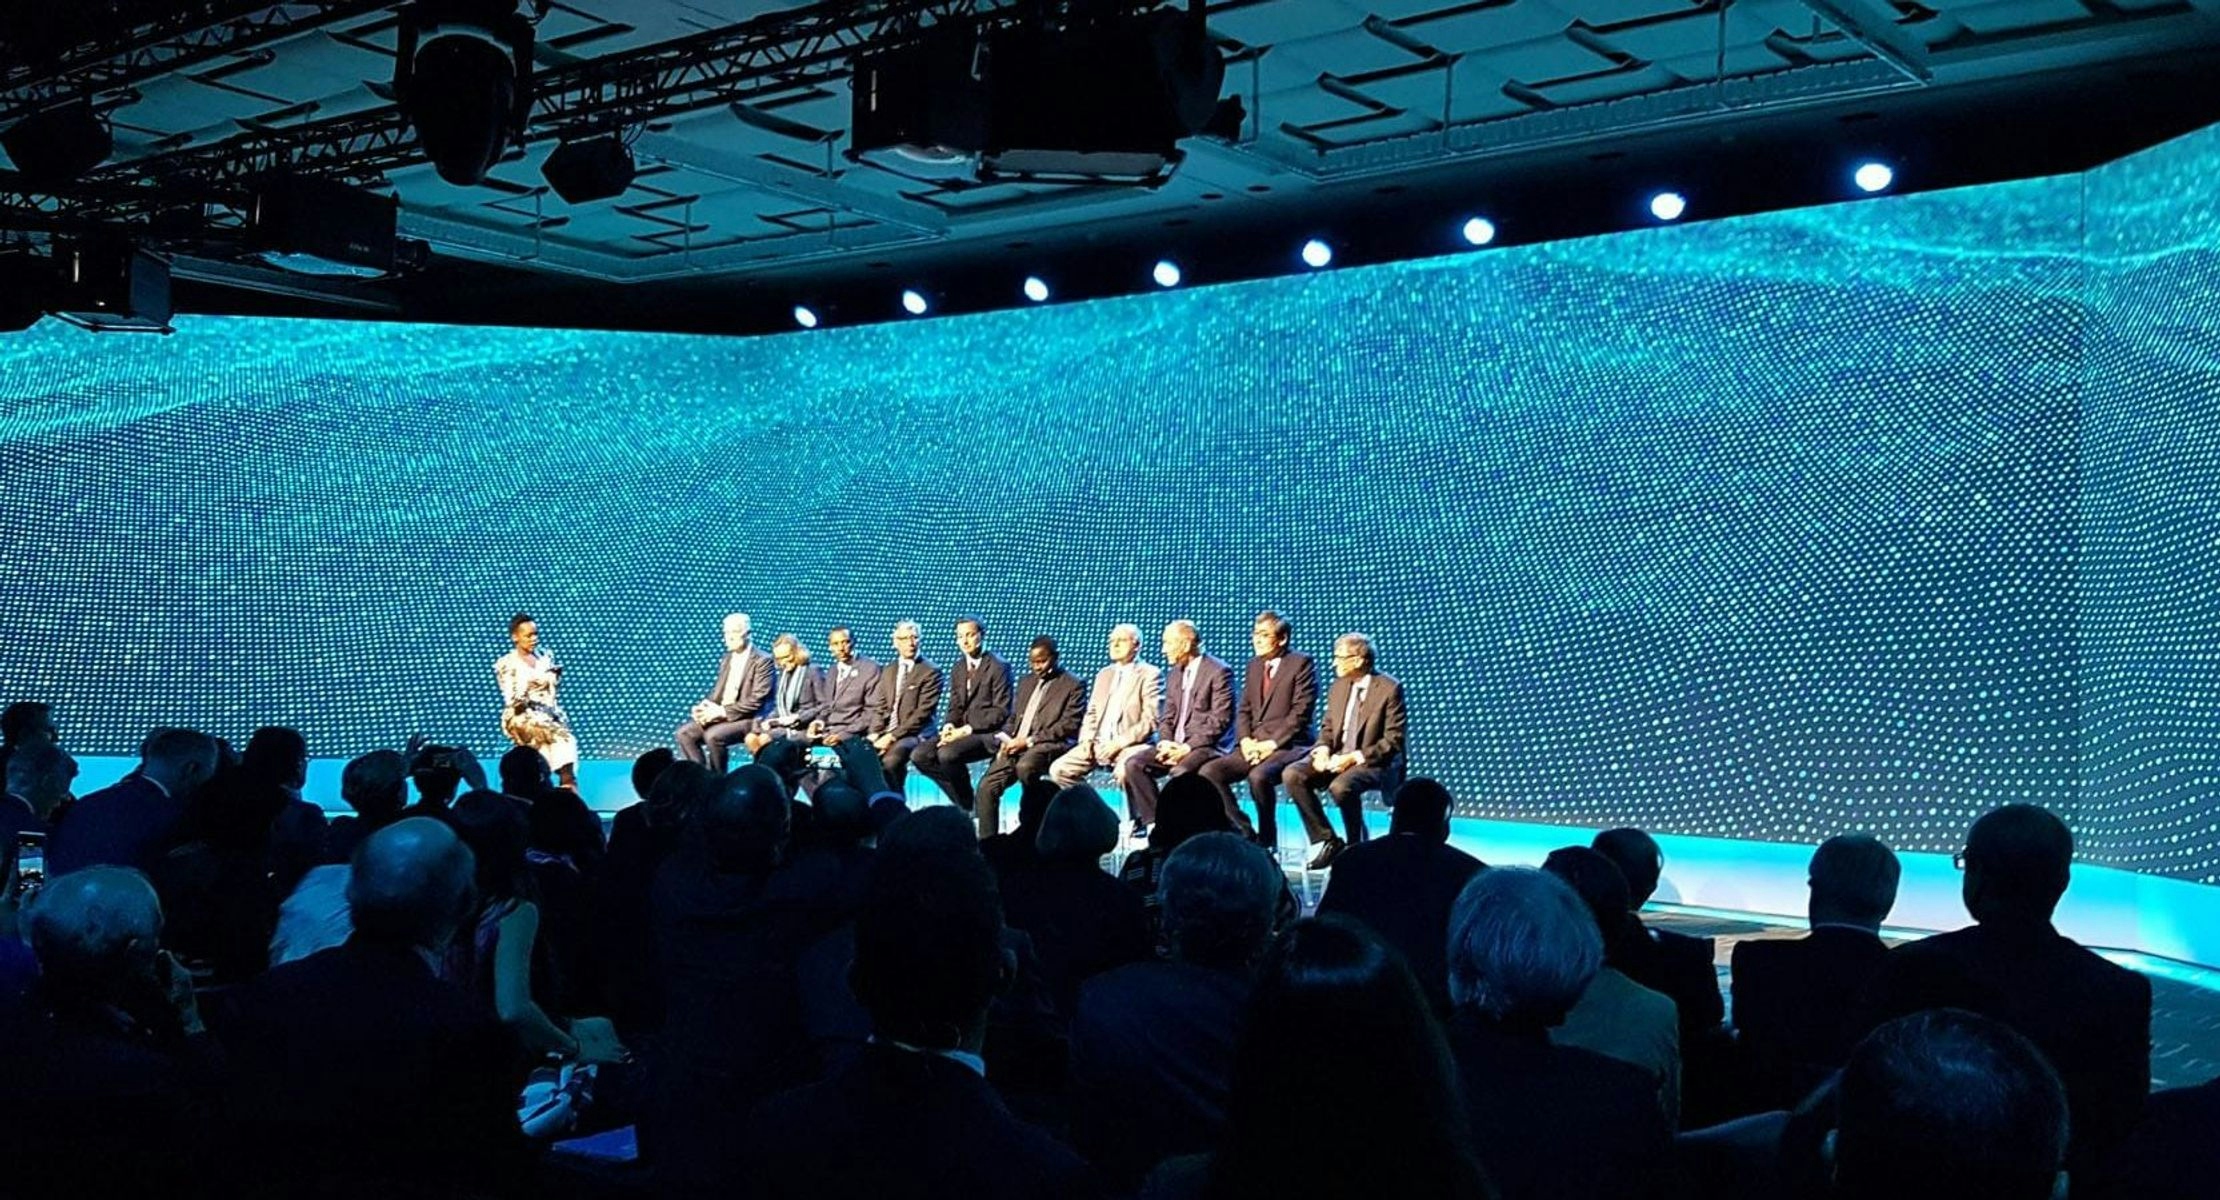 A photo taken during the Cascade presentation. Ten speakers sit on stage in front of three floor to ceiling blue screens that display a mesh moving like the surface of water. In the foreground, an audience sit in the dark watching the stage.